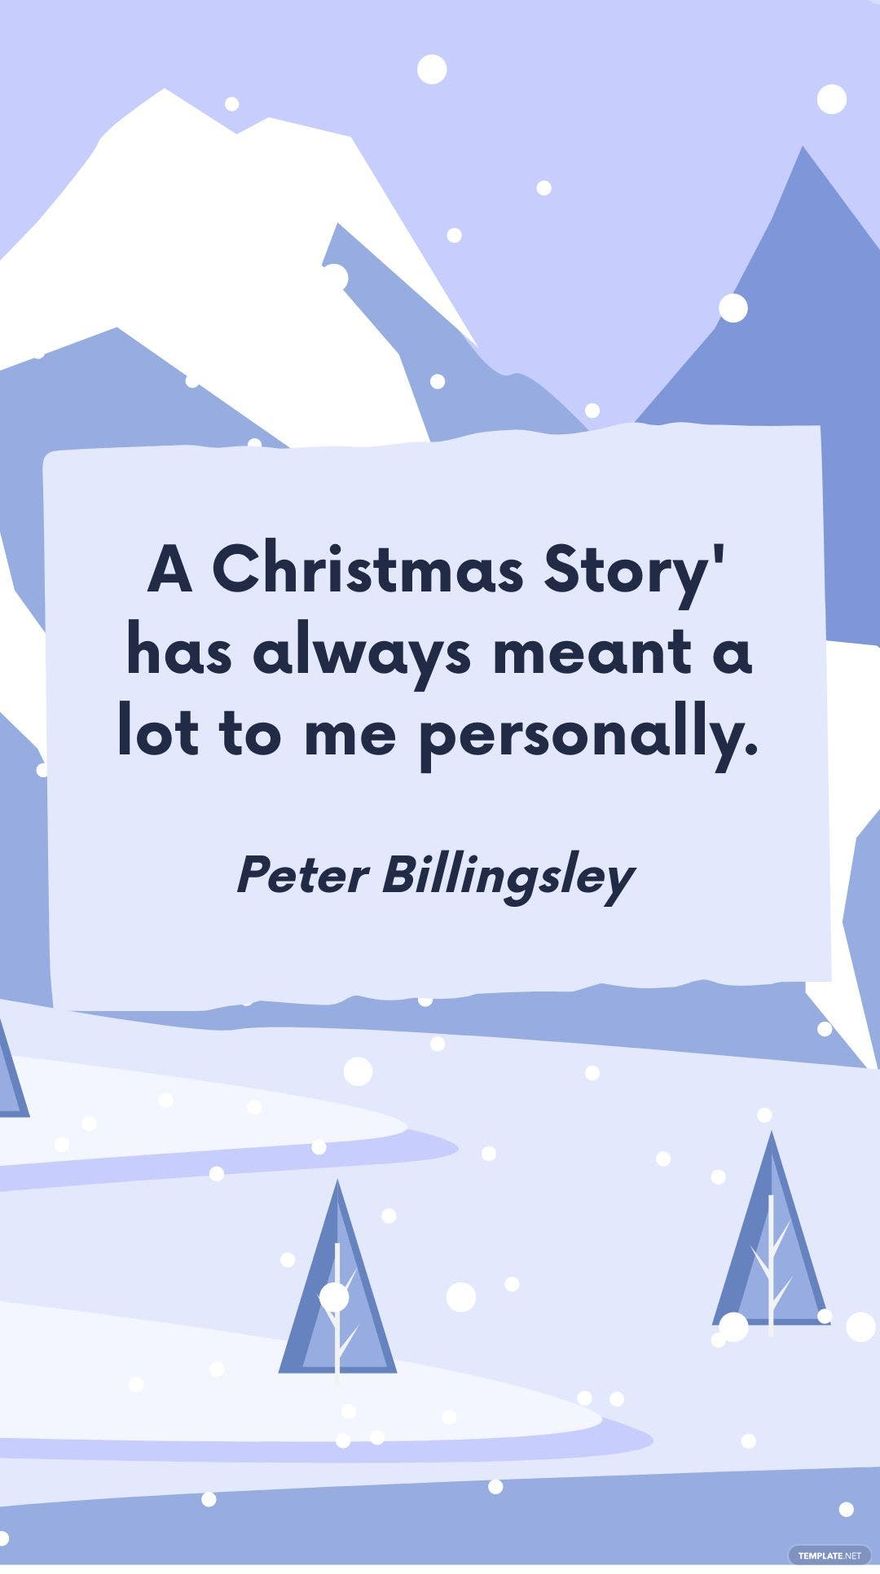 Peter Billingsley - A Christmas Story' has always meant a lot to me personally. in JPG